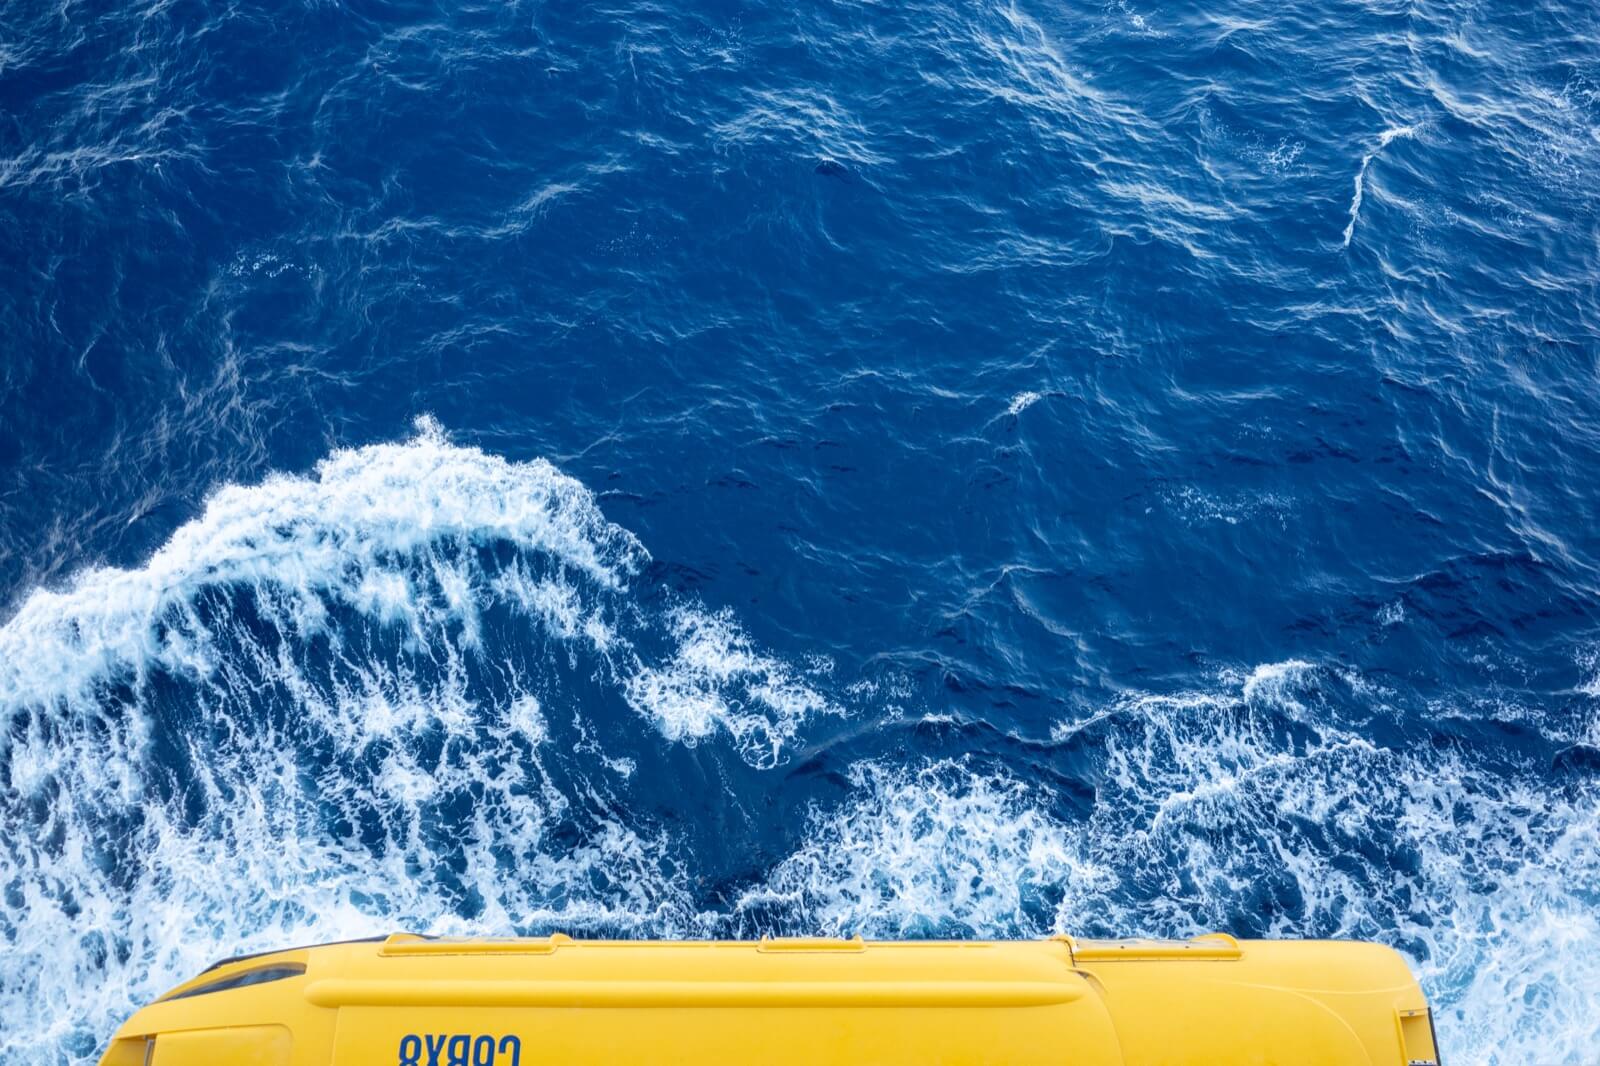 A yellow lifeboat on the Harmony of the Seas, seen from above against the blue ocean